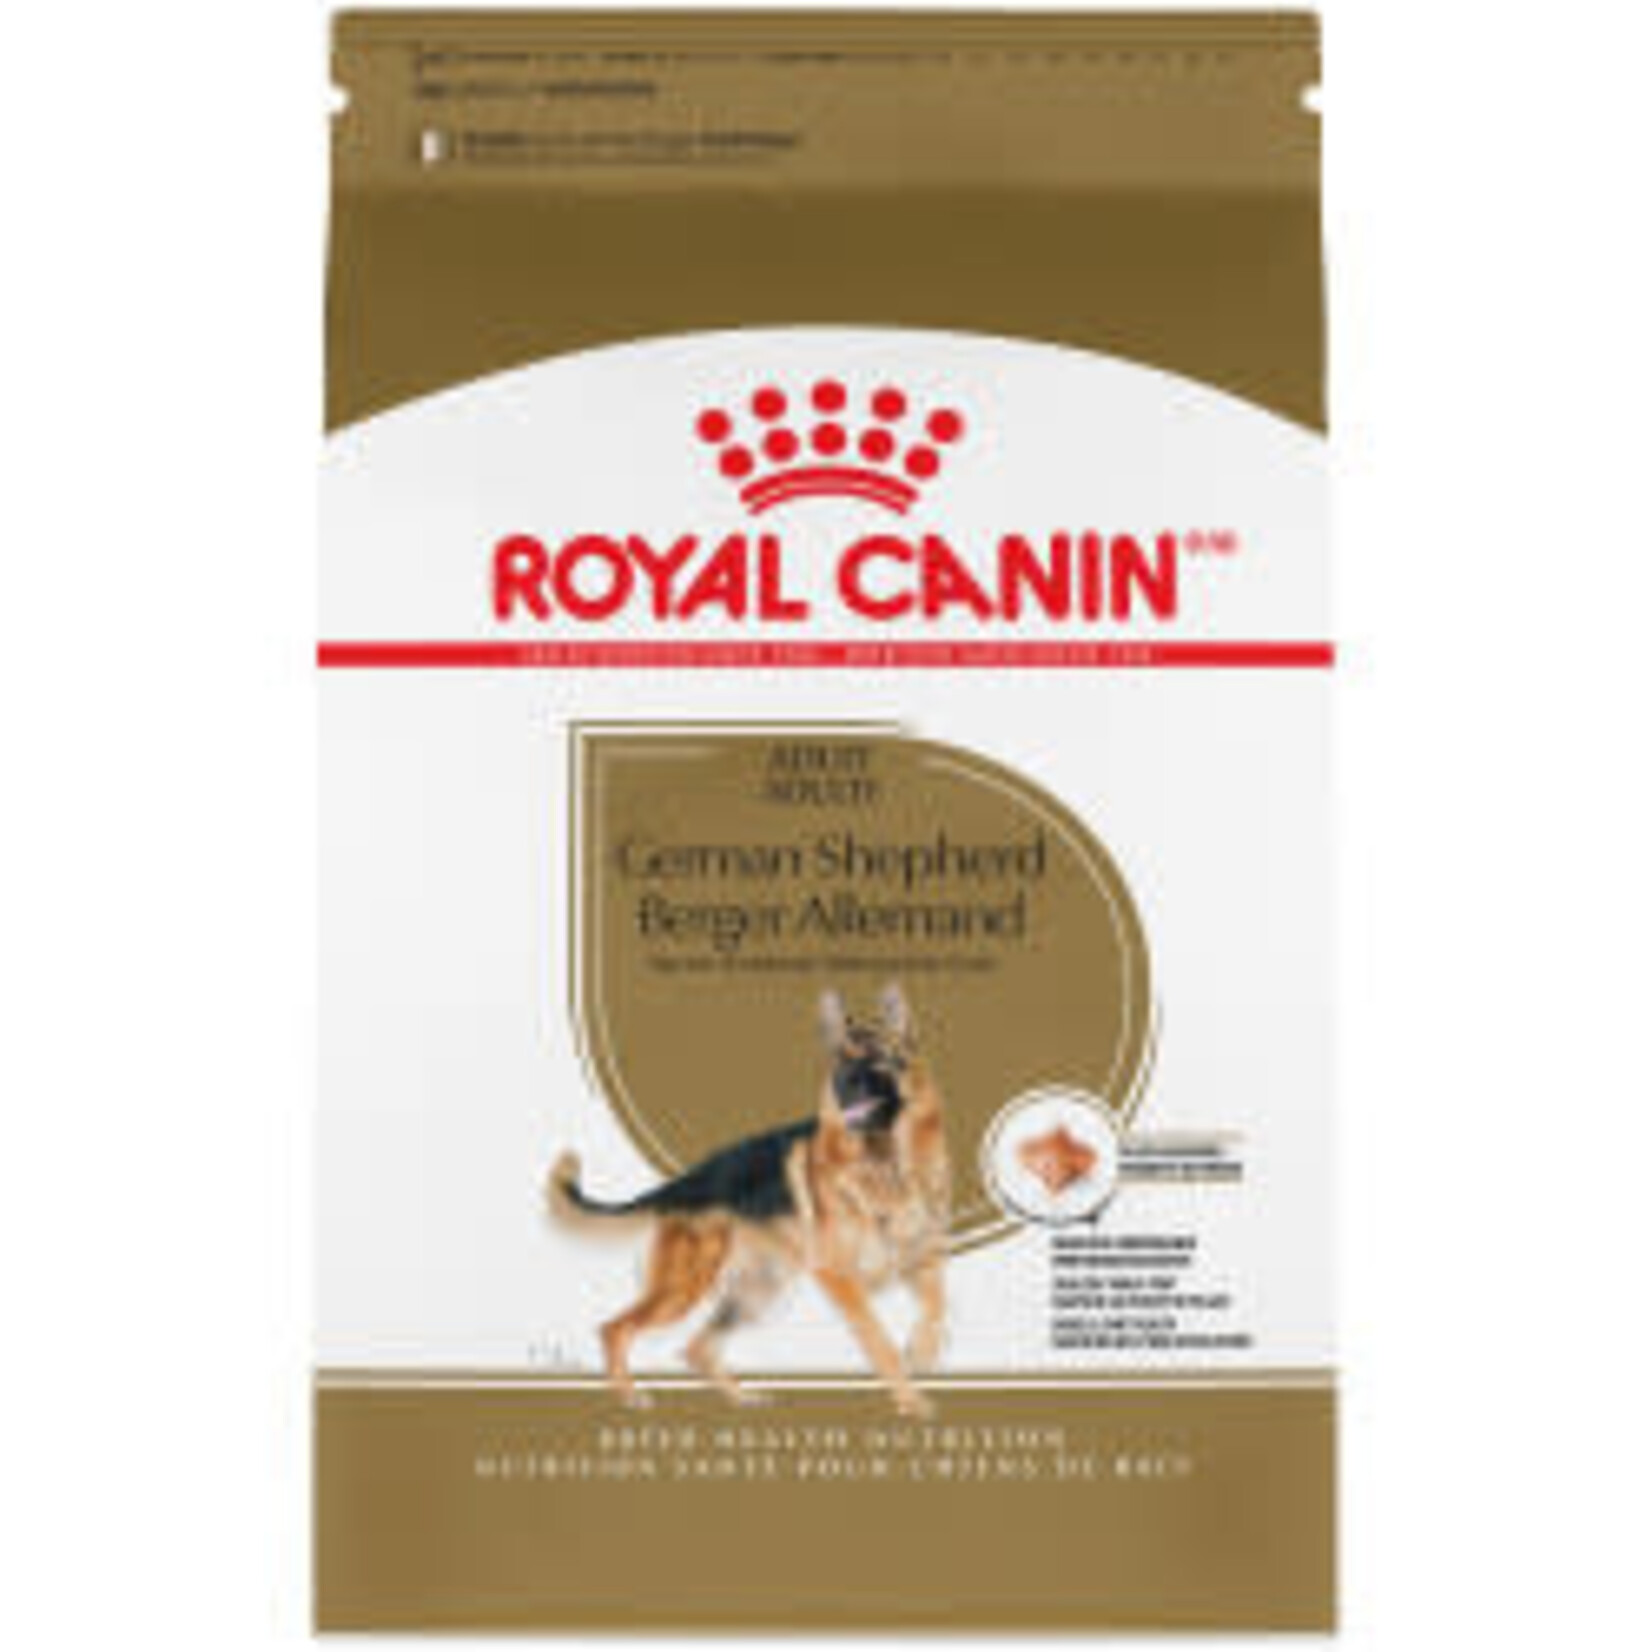 Royal Canin Royal Canin Berger Allemand Adulte 30lb/13.61kg